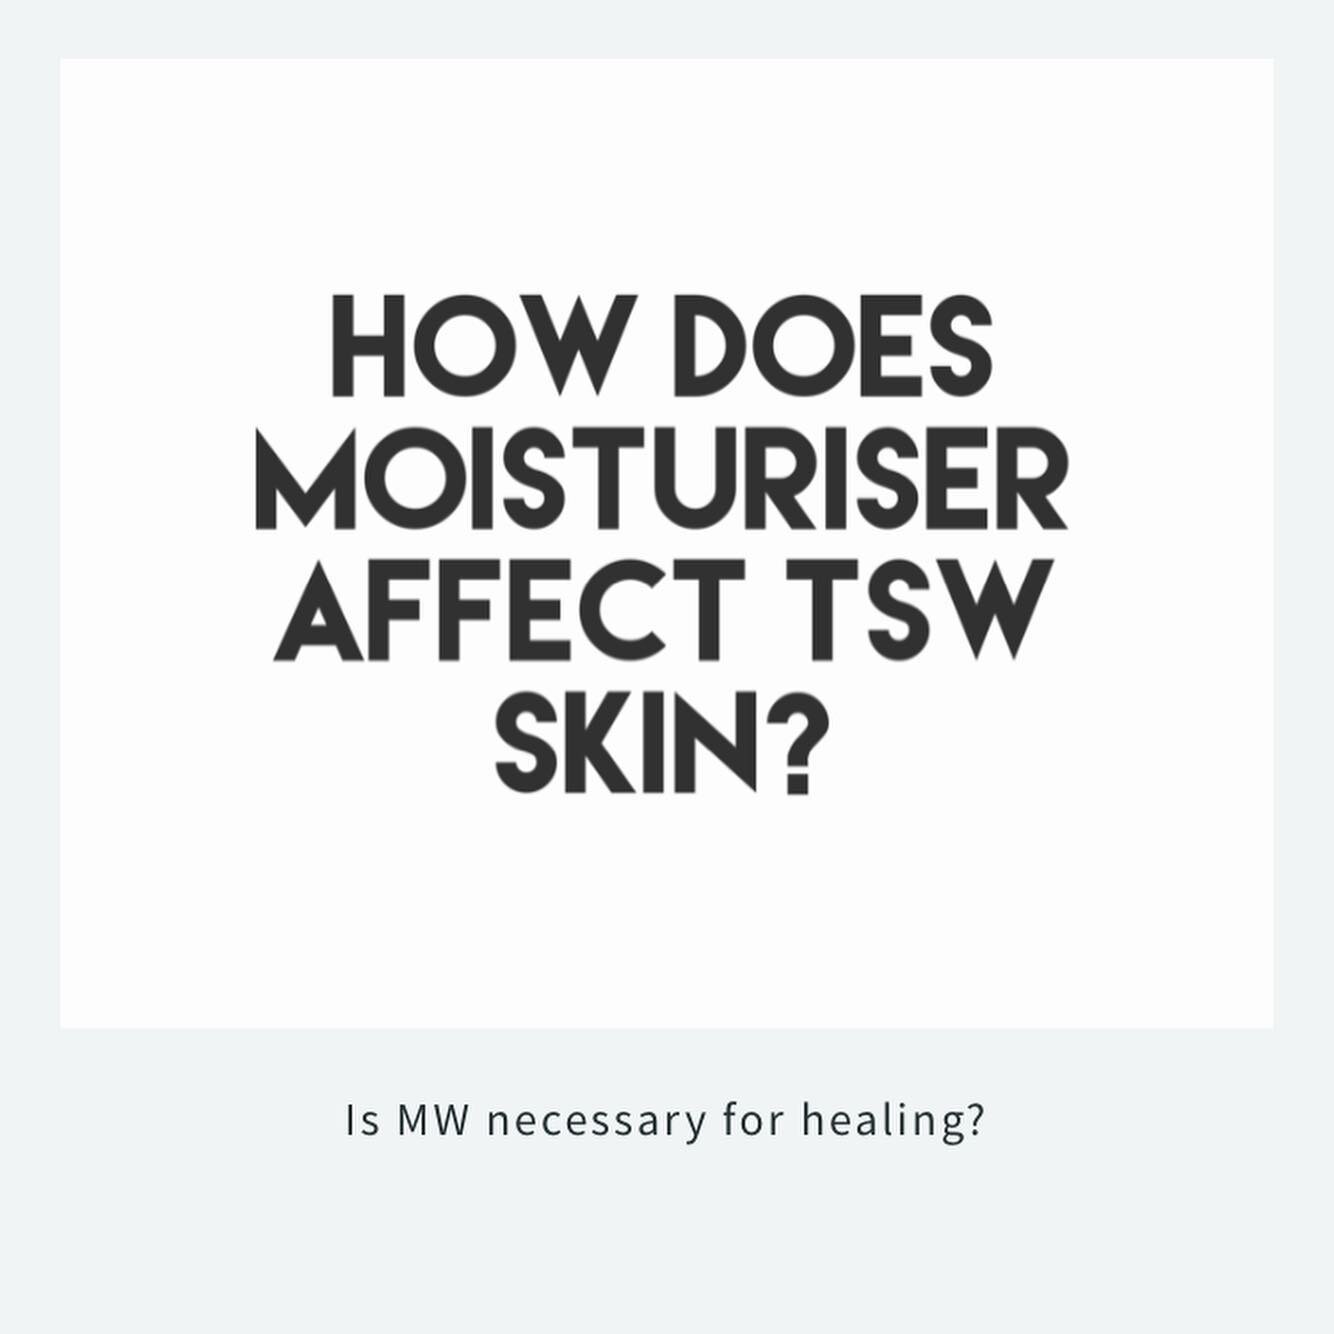 Webpage on Moisturisers and TSW skin is up! I hope this is useful. I know this page is probably a little more complicated and I hope I wrote it clearly enough! Please give me feedback if anything needs further clarification. 

Added a segment where I